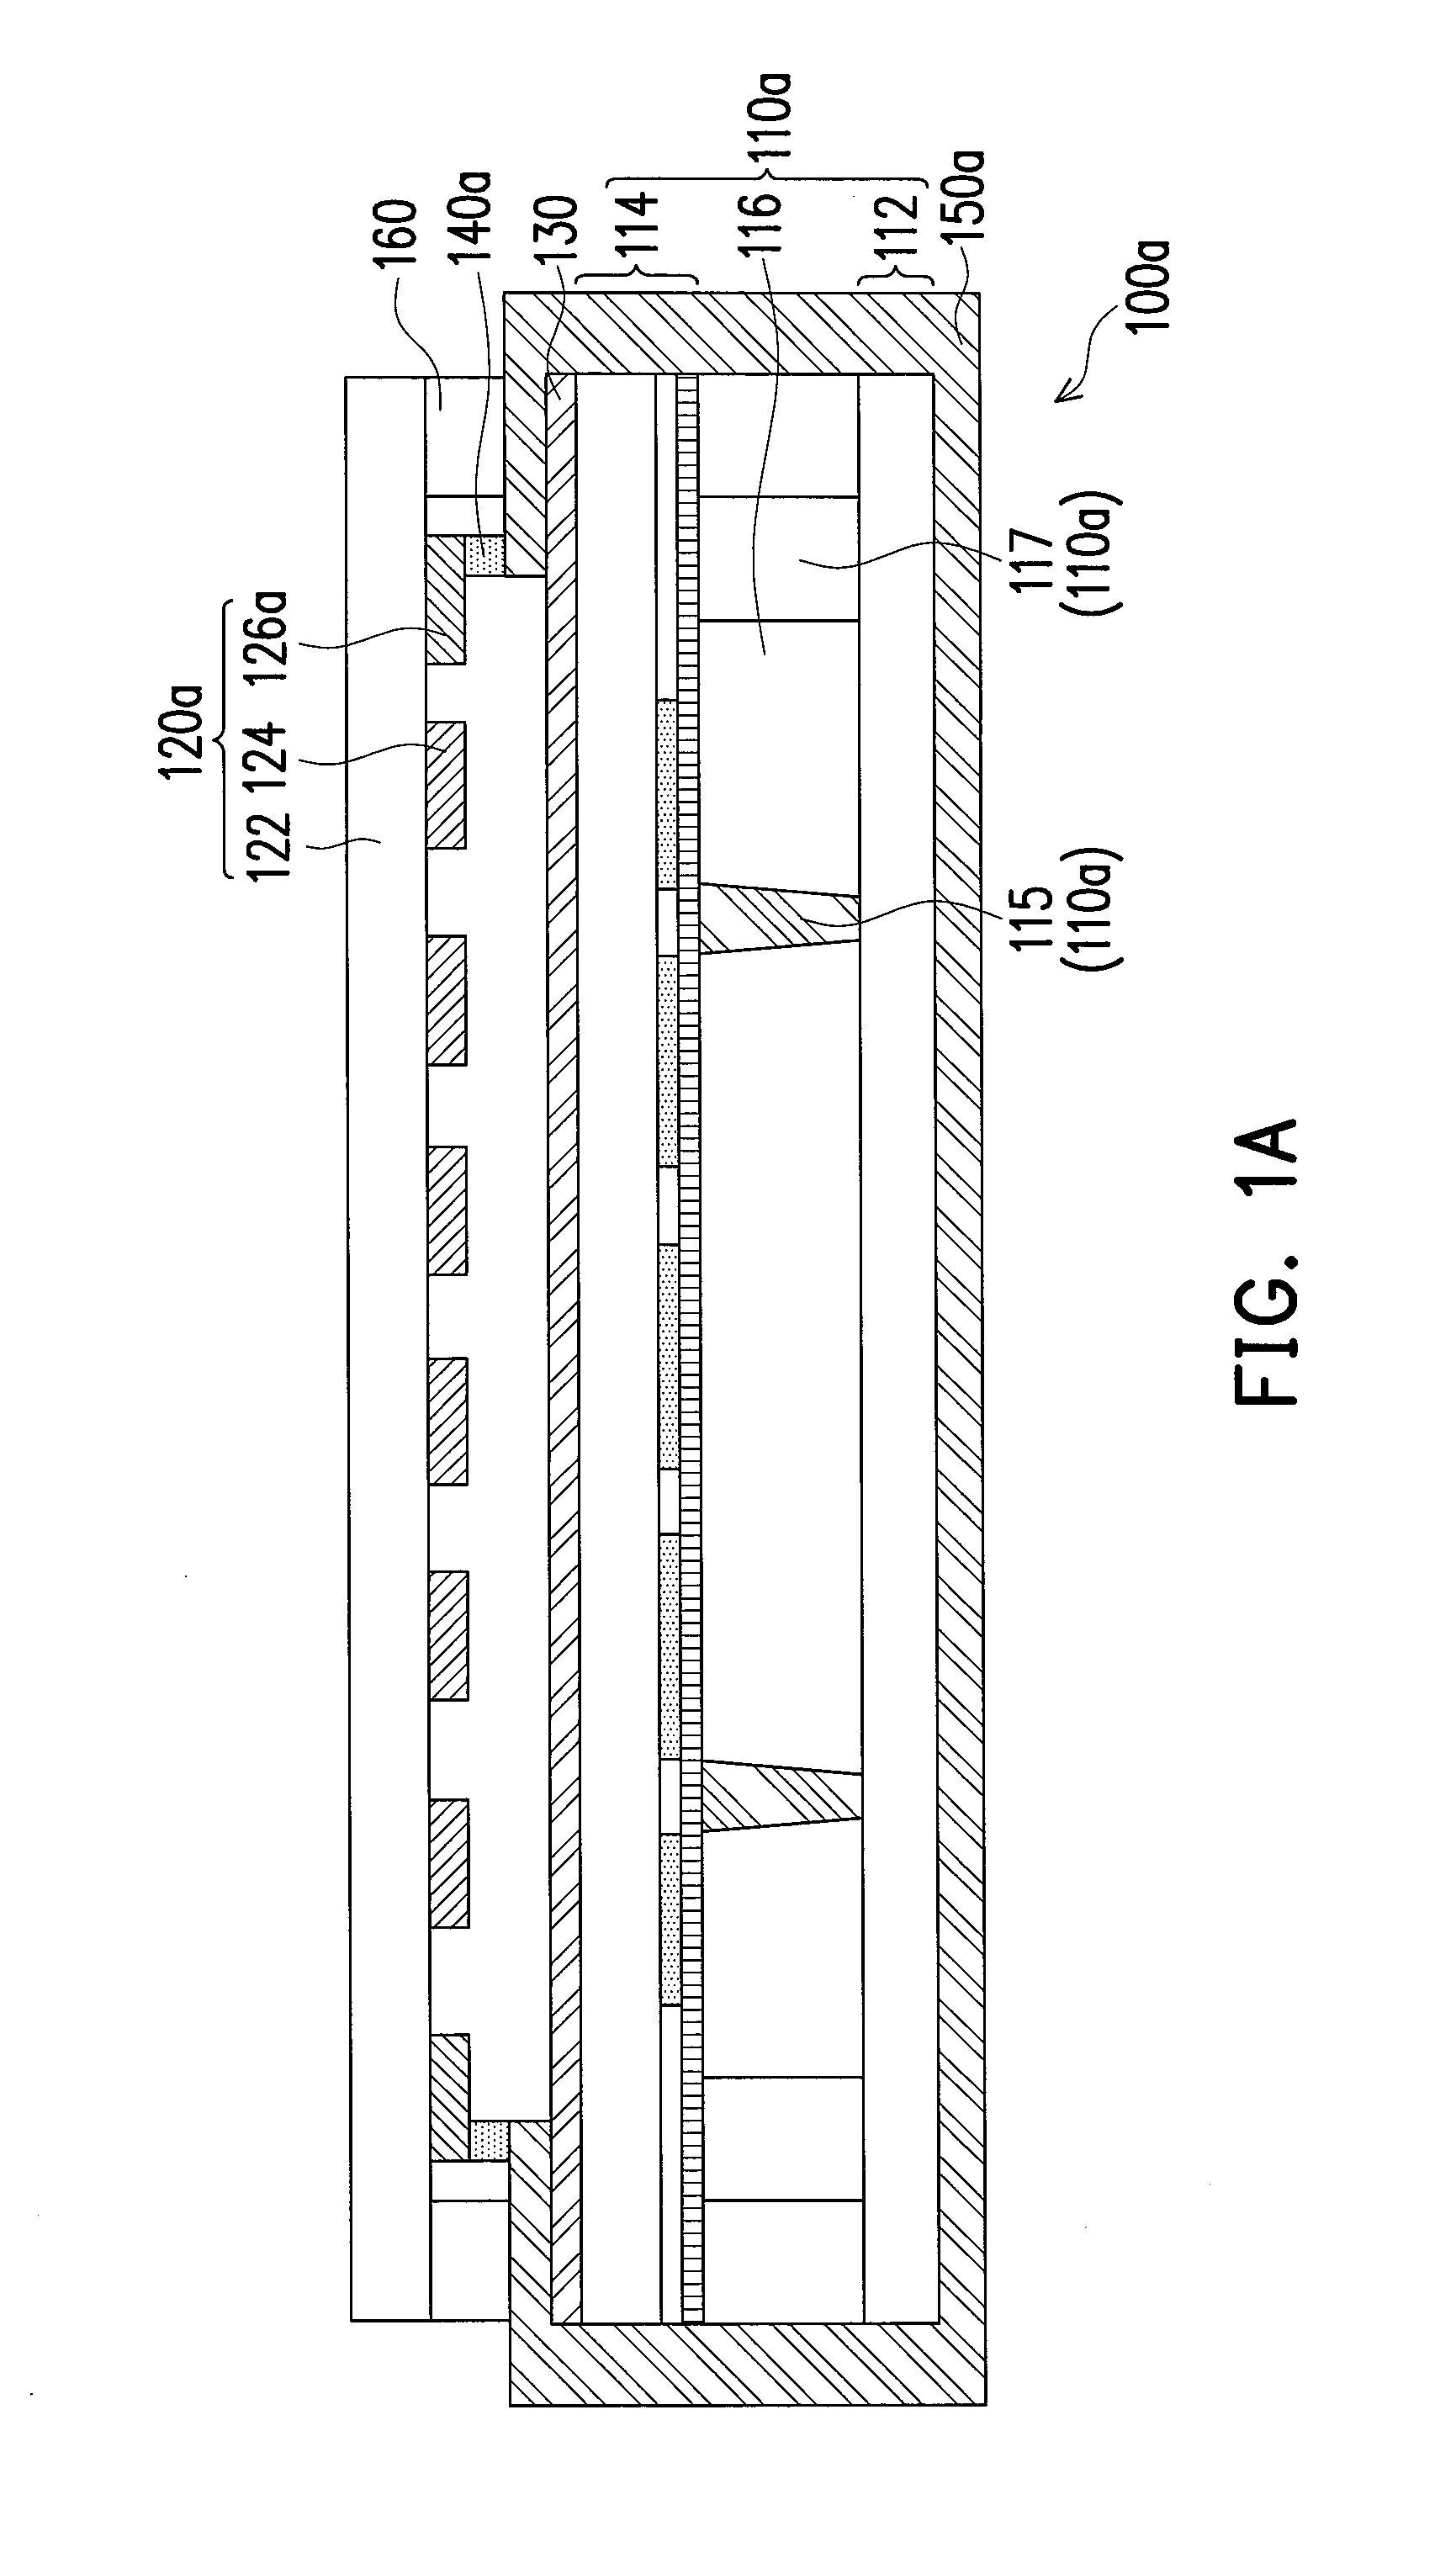 Touch display apparatus